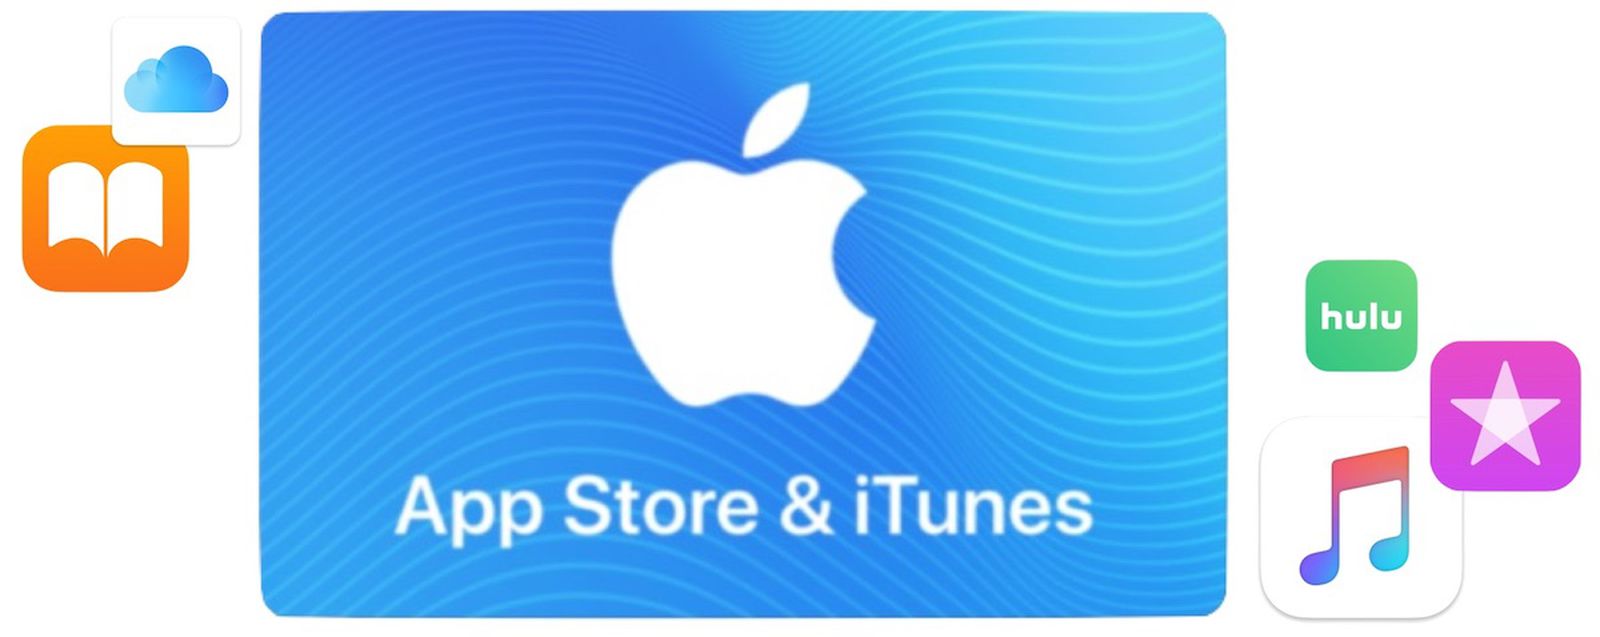 Itunes Gift Card Deals Save Up To 15 On Itunes Credit From Paypal Target And Costco Macrumors